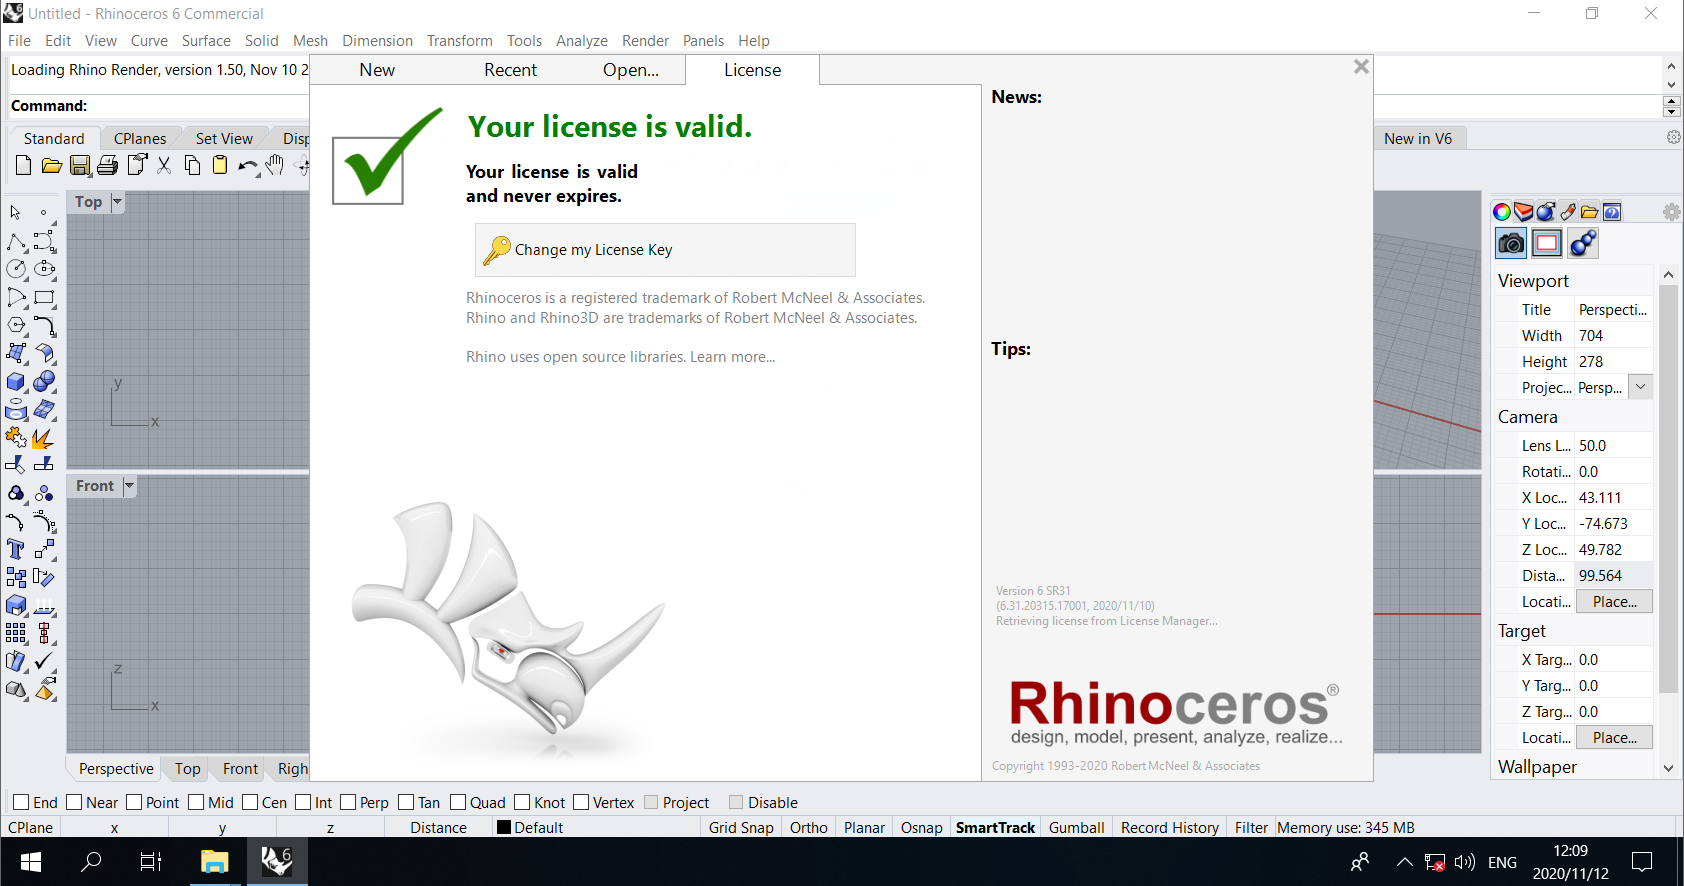 Working with Rhinoceros 6.31 full license